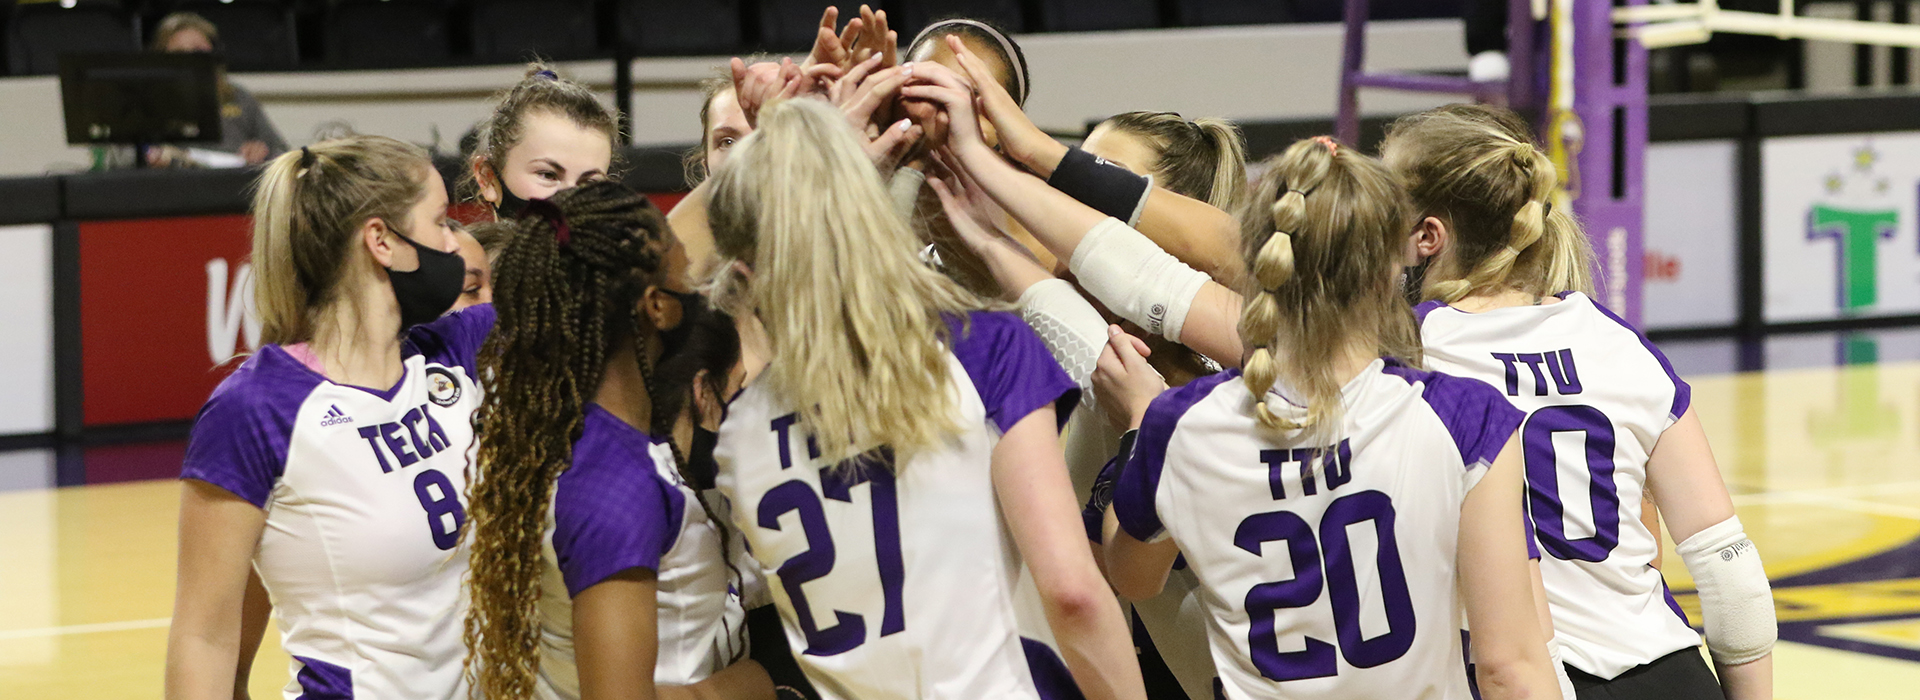 Tech volleyball program honored with AVCA Team Academic Award for third straight year